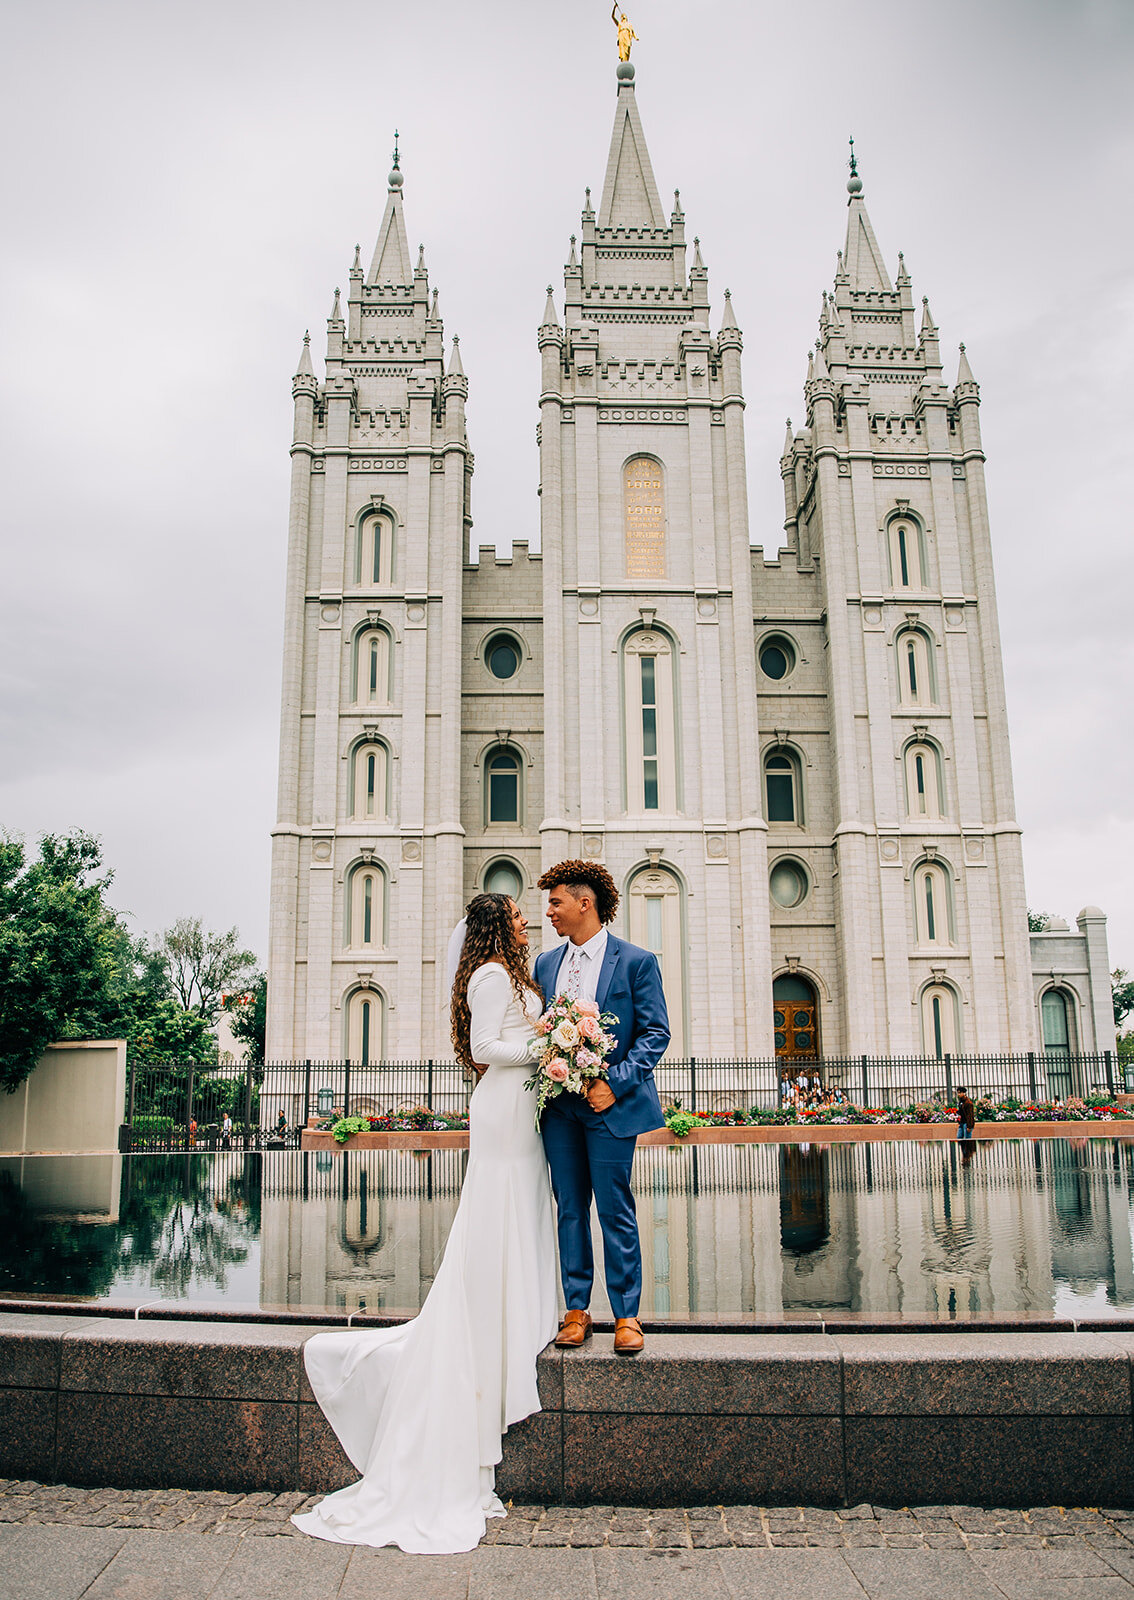  salt lake city temple beautiful shot of couple kissing on the fountain in front of the temple long wedding gown train wedding pose idea for bride and groom married in the salt lake city lds temple temple square fountains adorable newlyweds bridals p